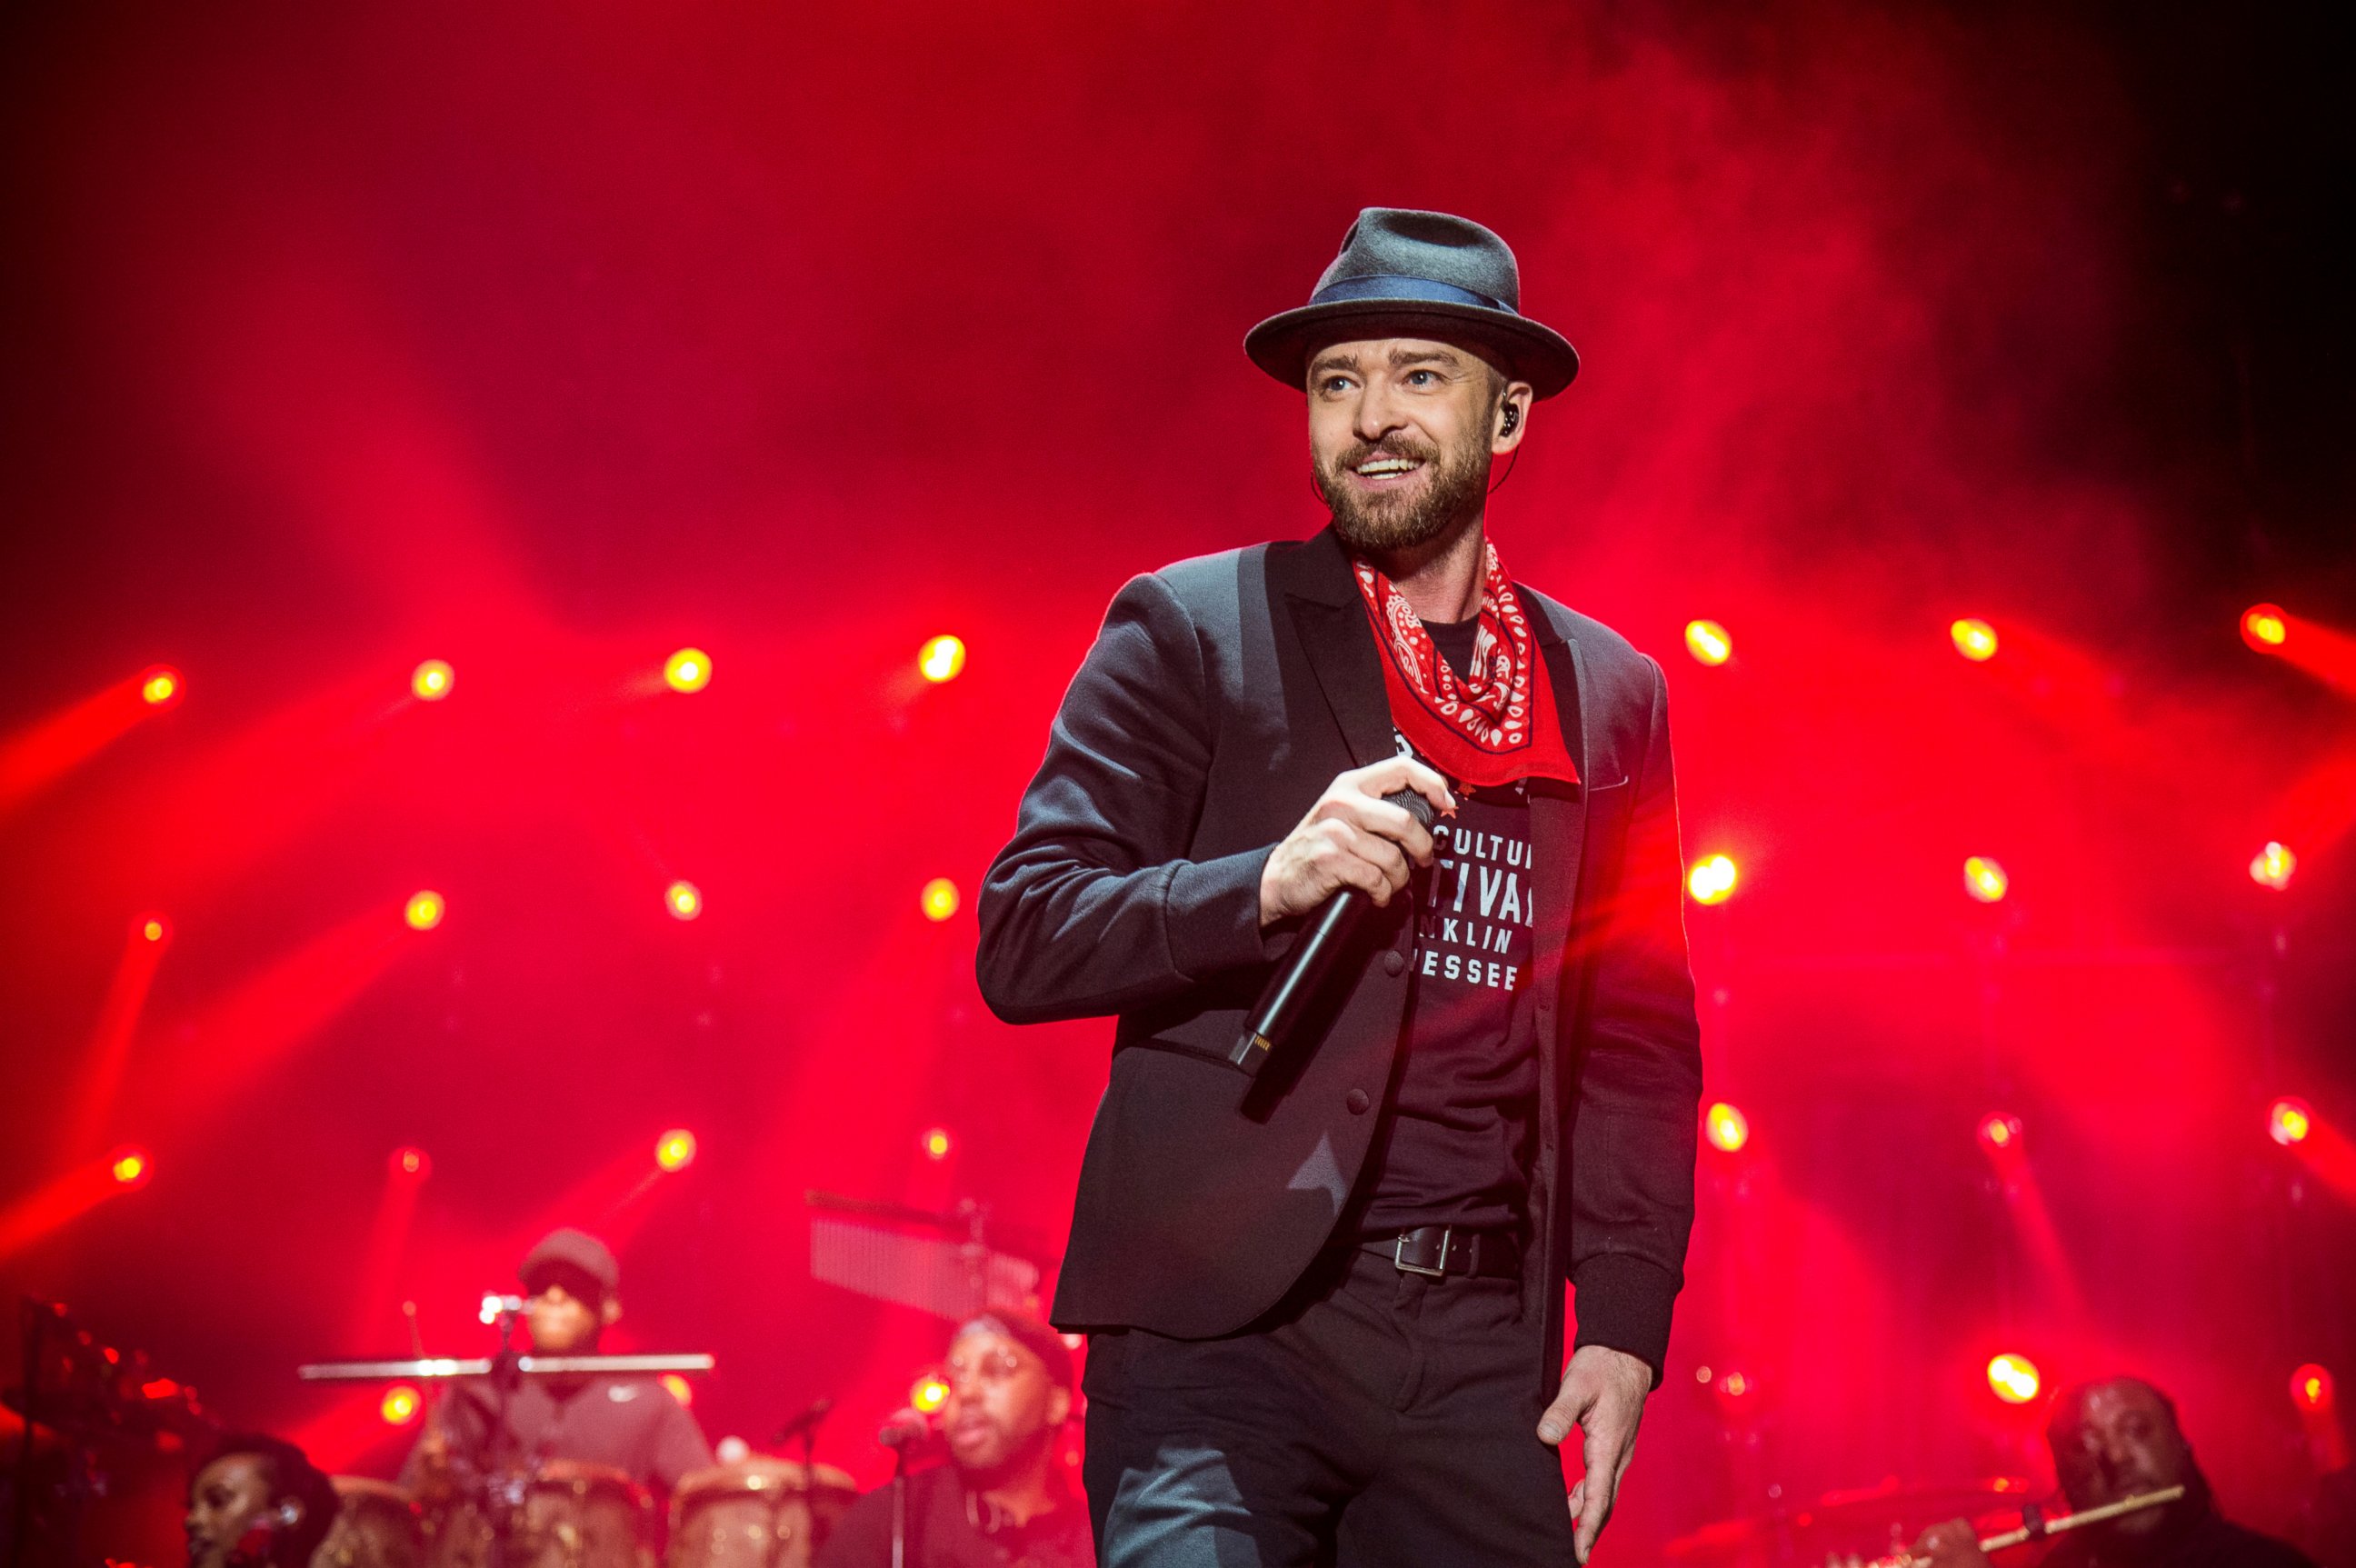 PHOTO: In this Sept. 23, 2017 file photo, Justin Timberlake performs at the Pilgrimage Music and Cultural Festival in Franklin, Tenn.